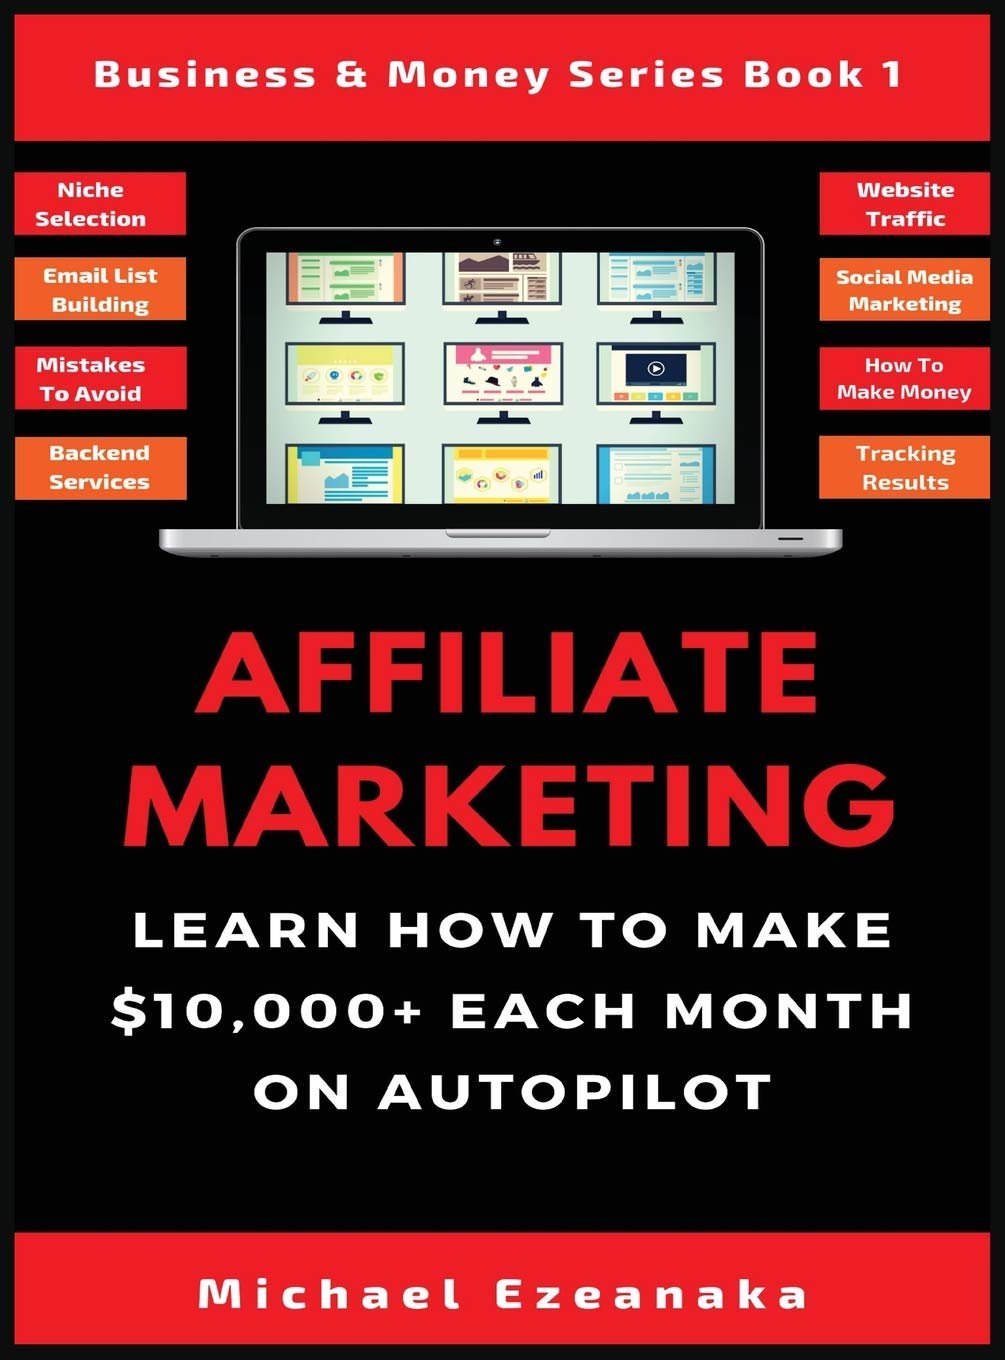 Affiliate Marketing Book Review